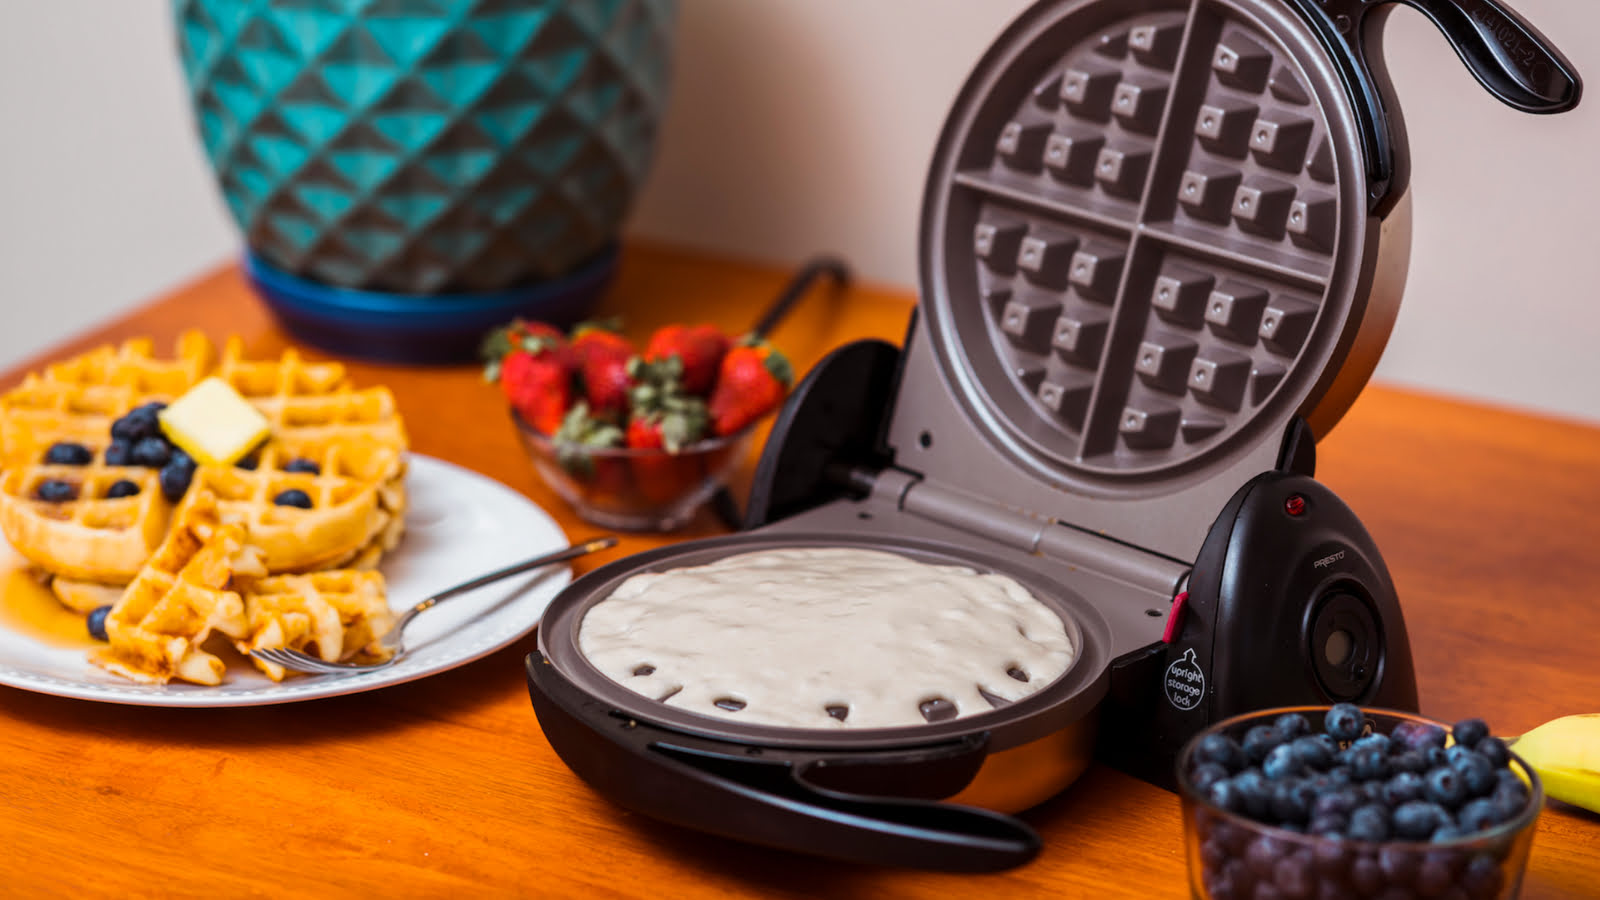 How Long To Cook Waffles In A Presto Waffle Iron